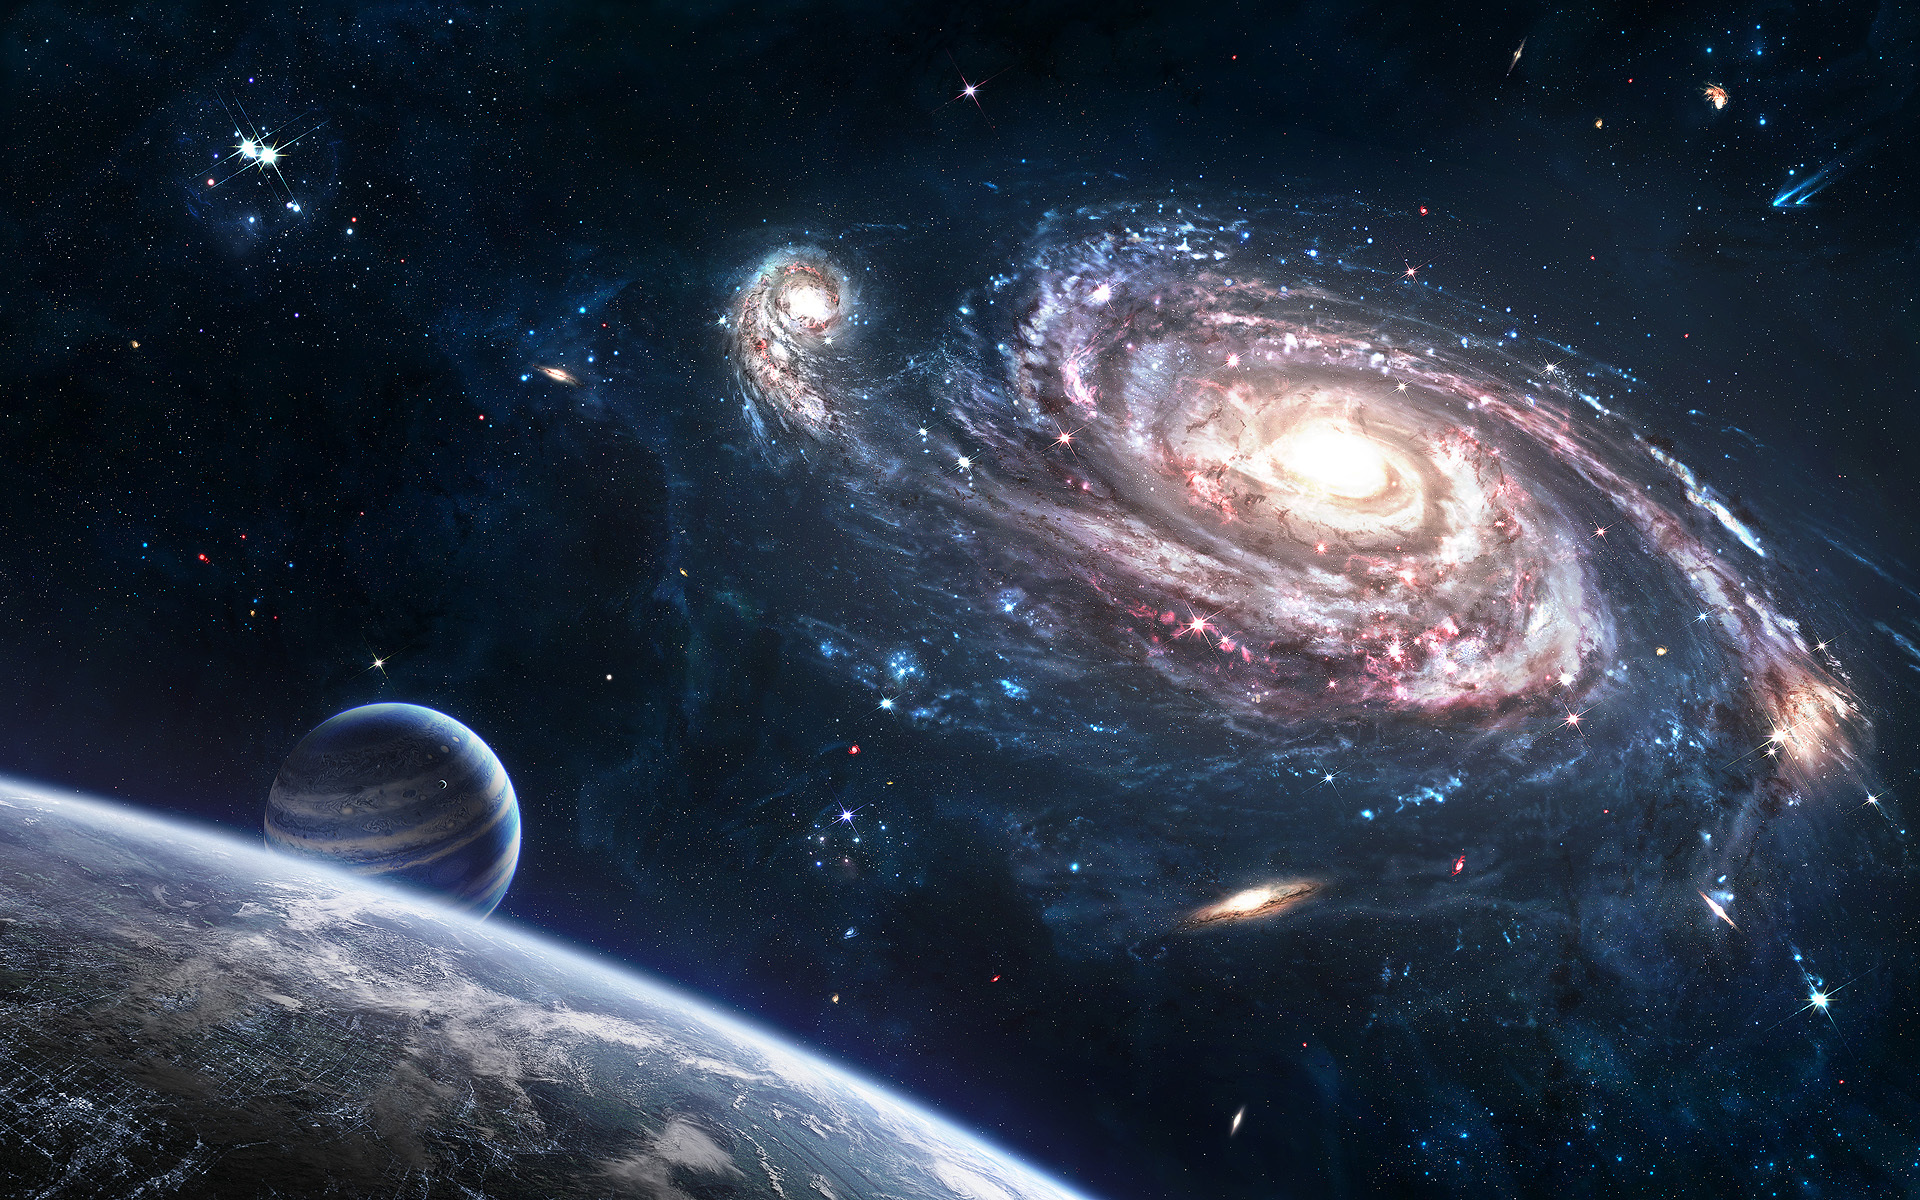 Spiral Galaxy Wallpaper And Image Pictures Photos